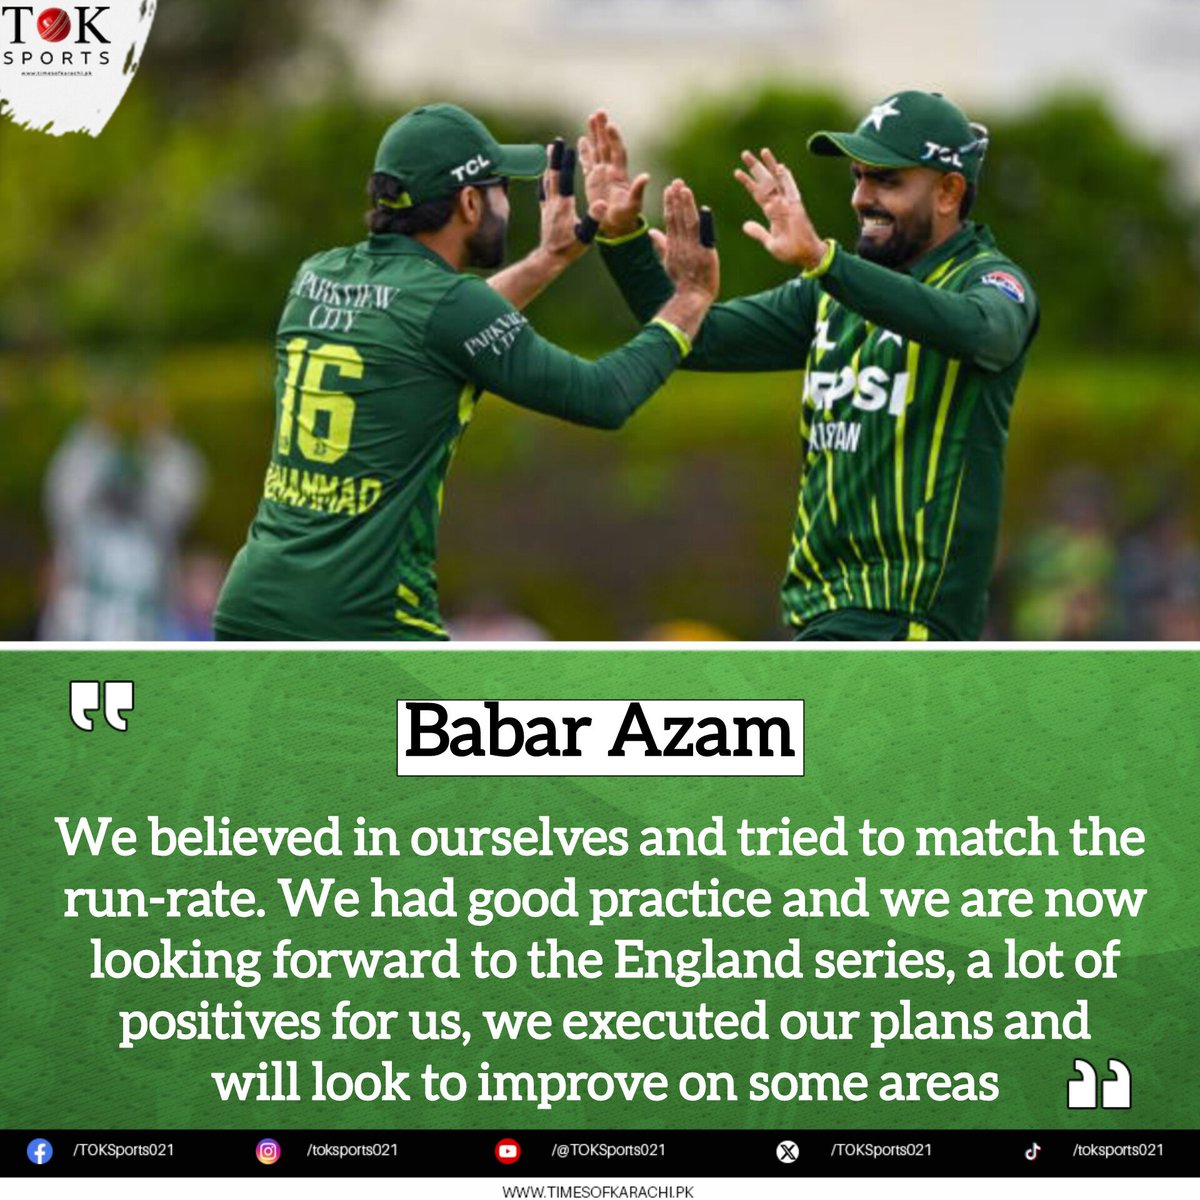 Babar Azam is positive about the team's efforts and focused on getting better for the England series.

#TOKSports #BabarAzam #PakvIre #PakvEng